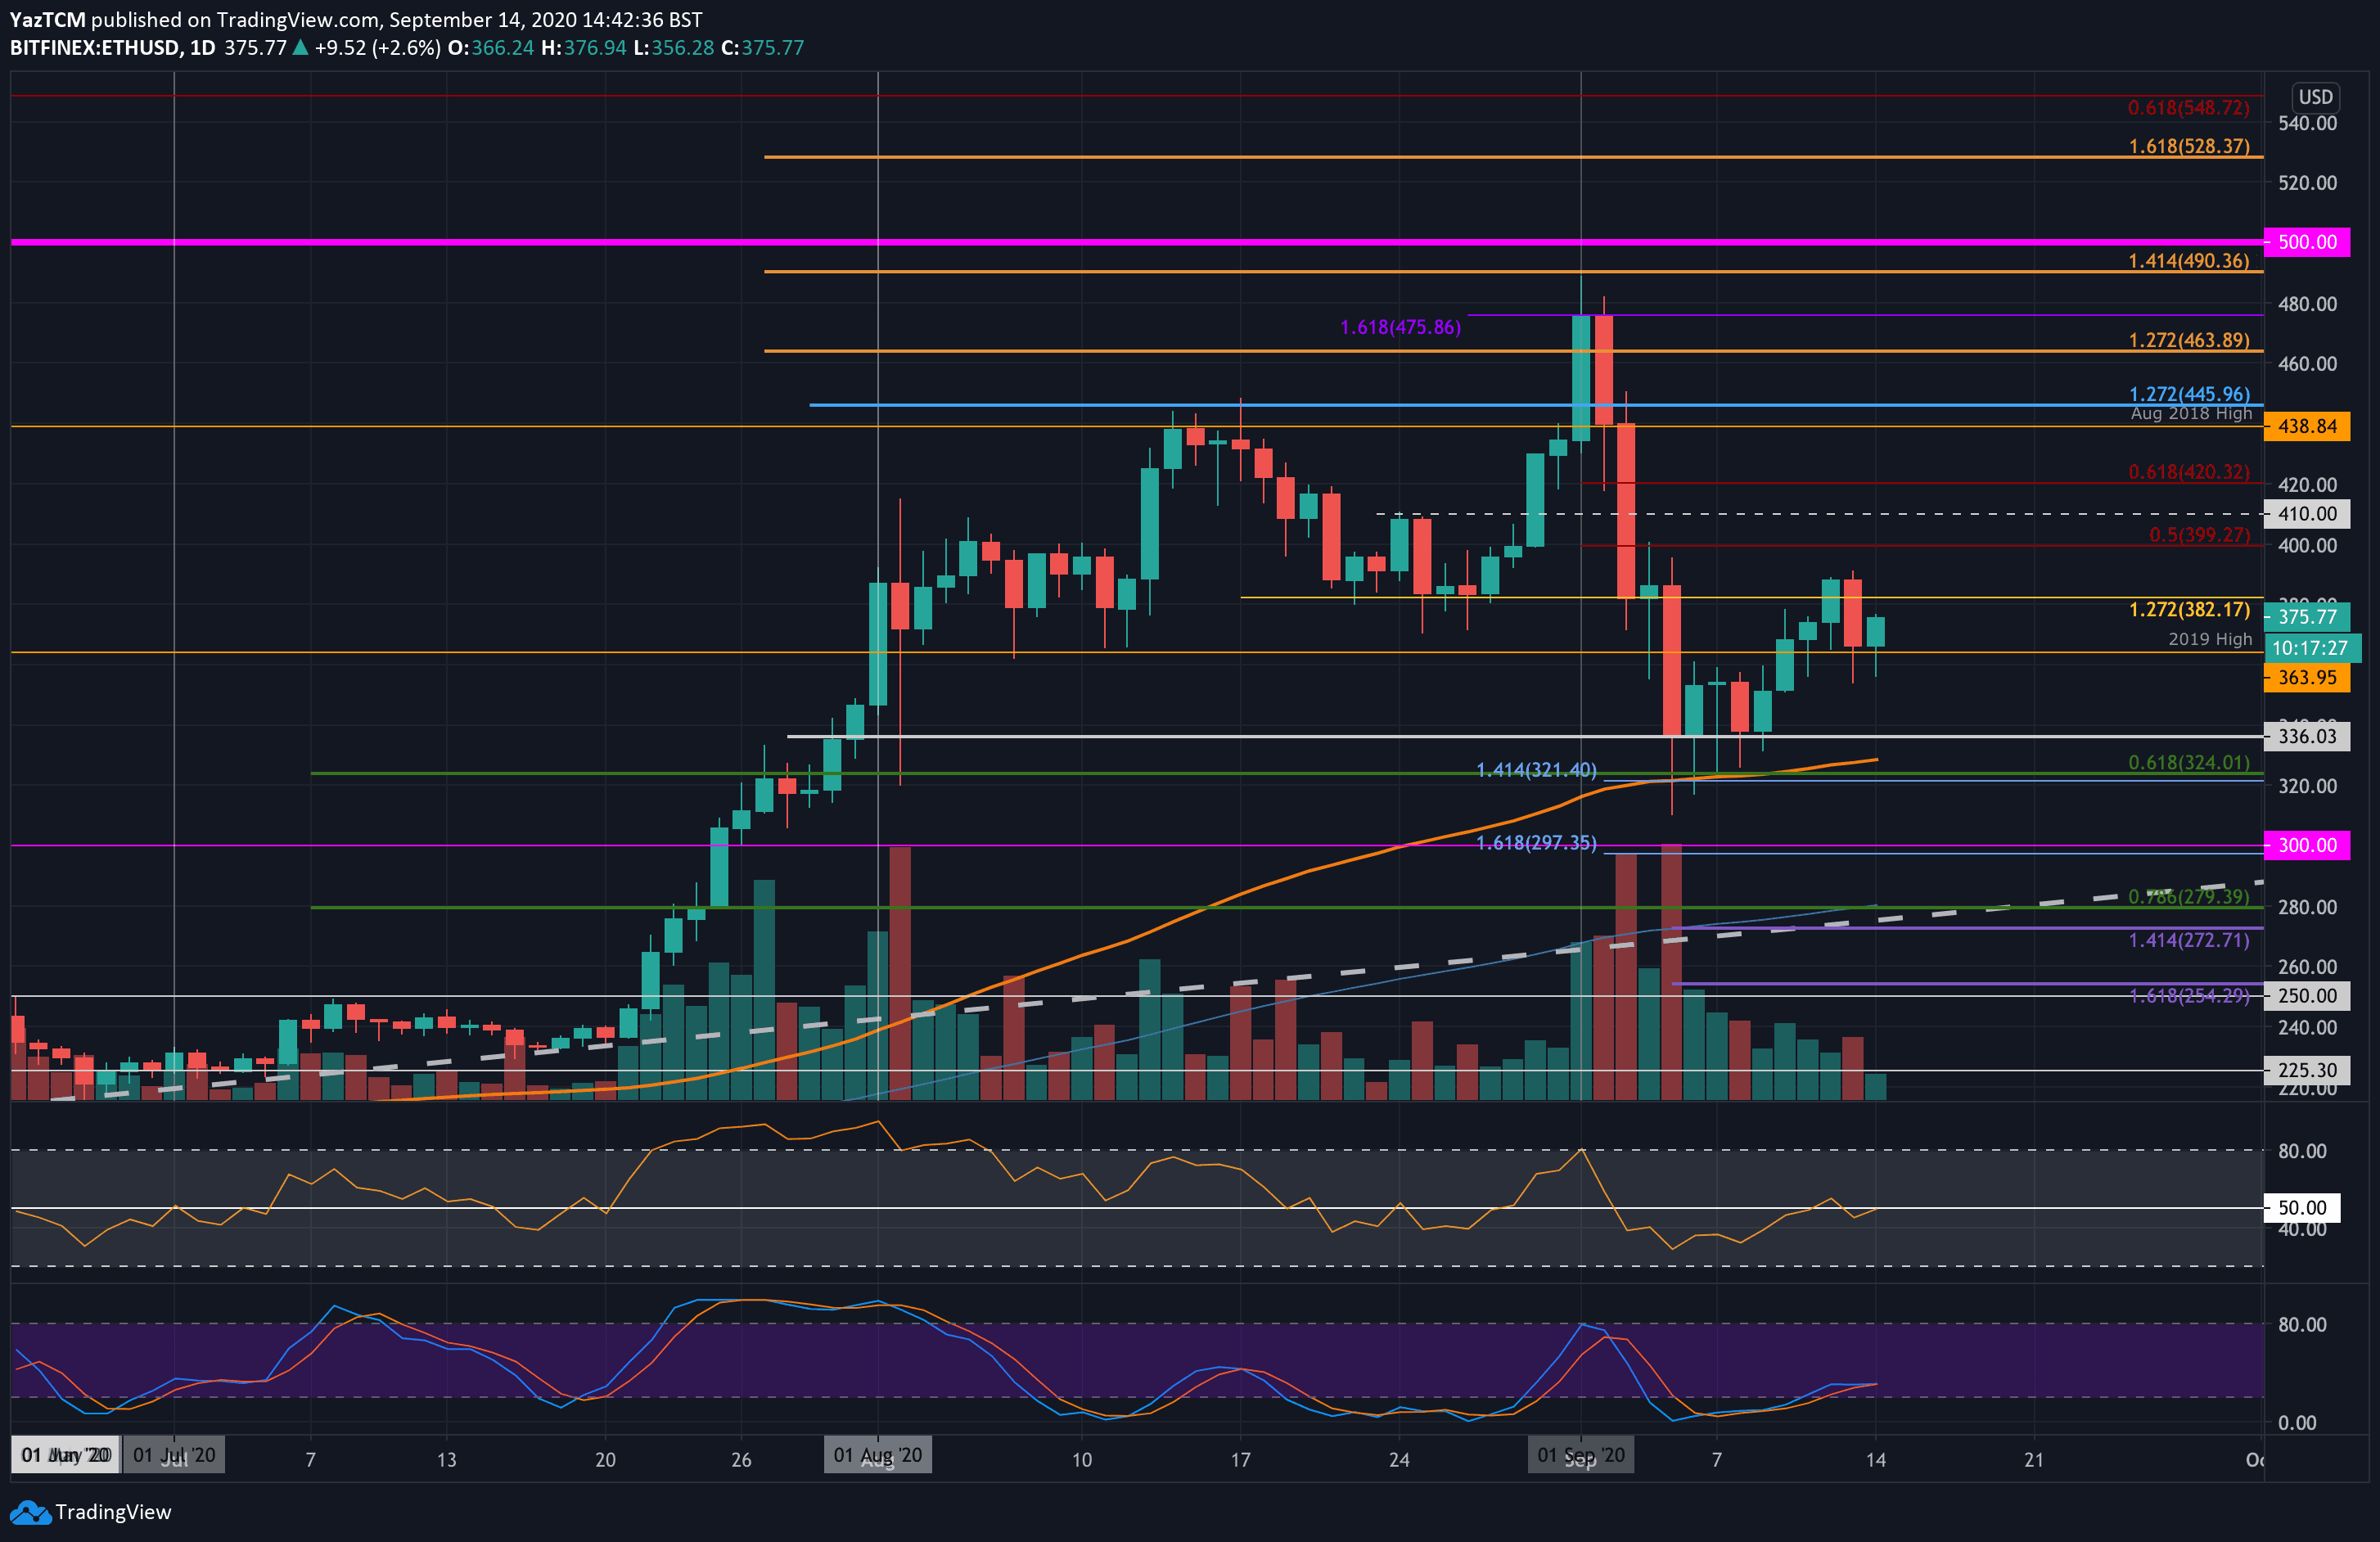 Eth-rebounds-7%-from-yesterday’s-low,-$400-next?-ethereum-price-analysis